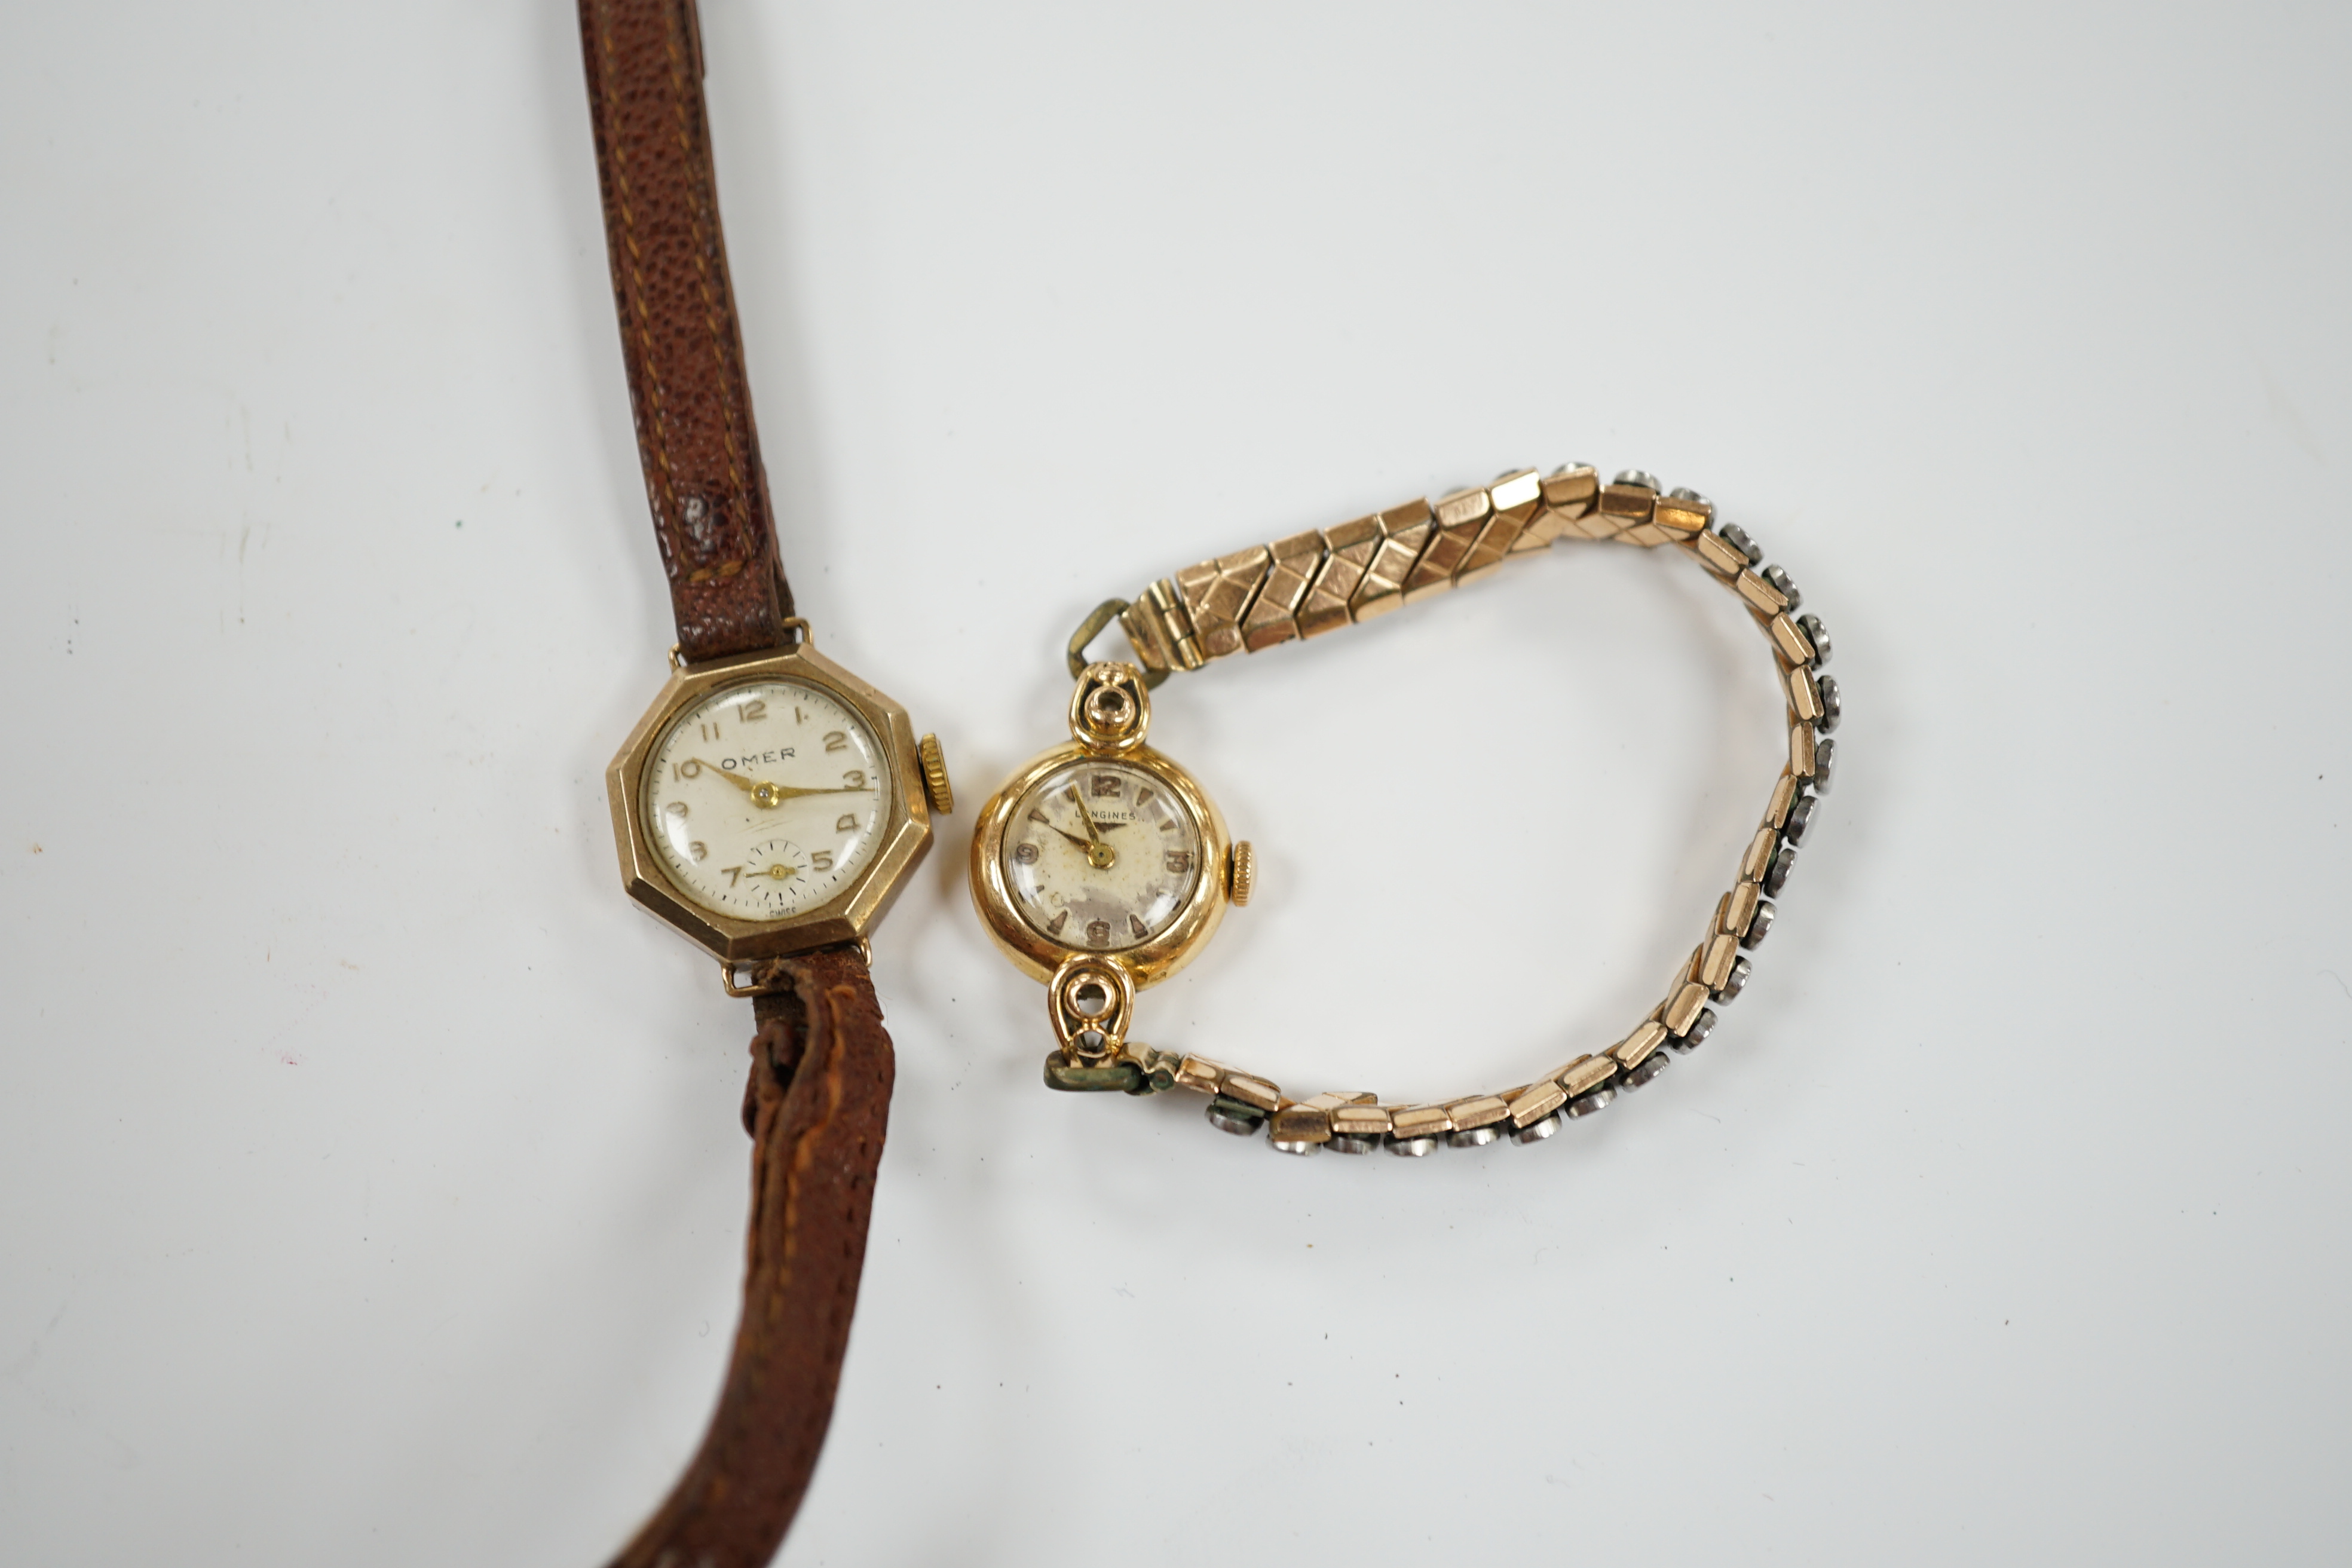 A lady's 18k Longines manual wind wrist watch, on a gold plated flexible bracelet, together with a lady's 9ct gold Omer manual wind wrist watch, on a leather strap.